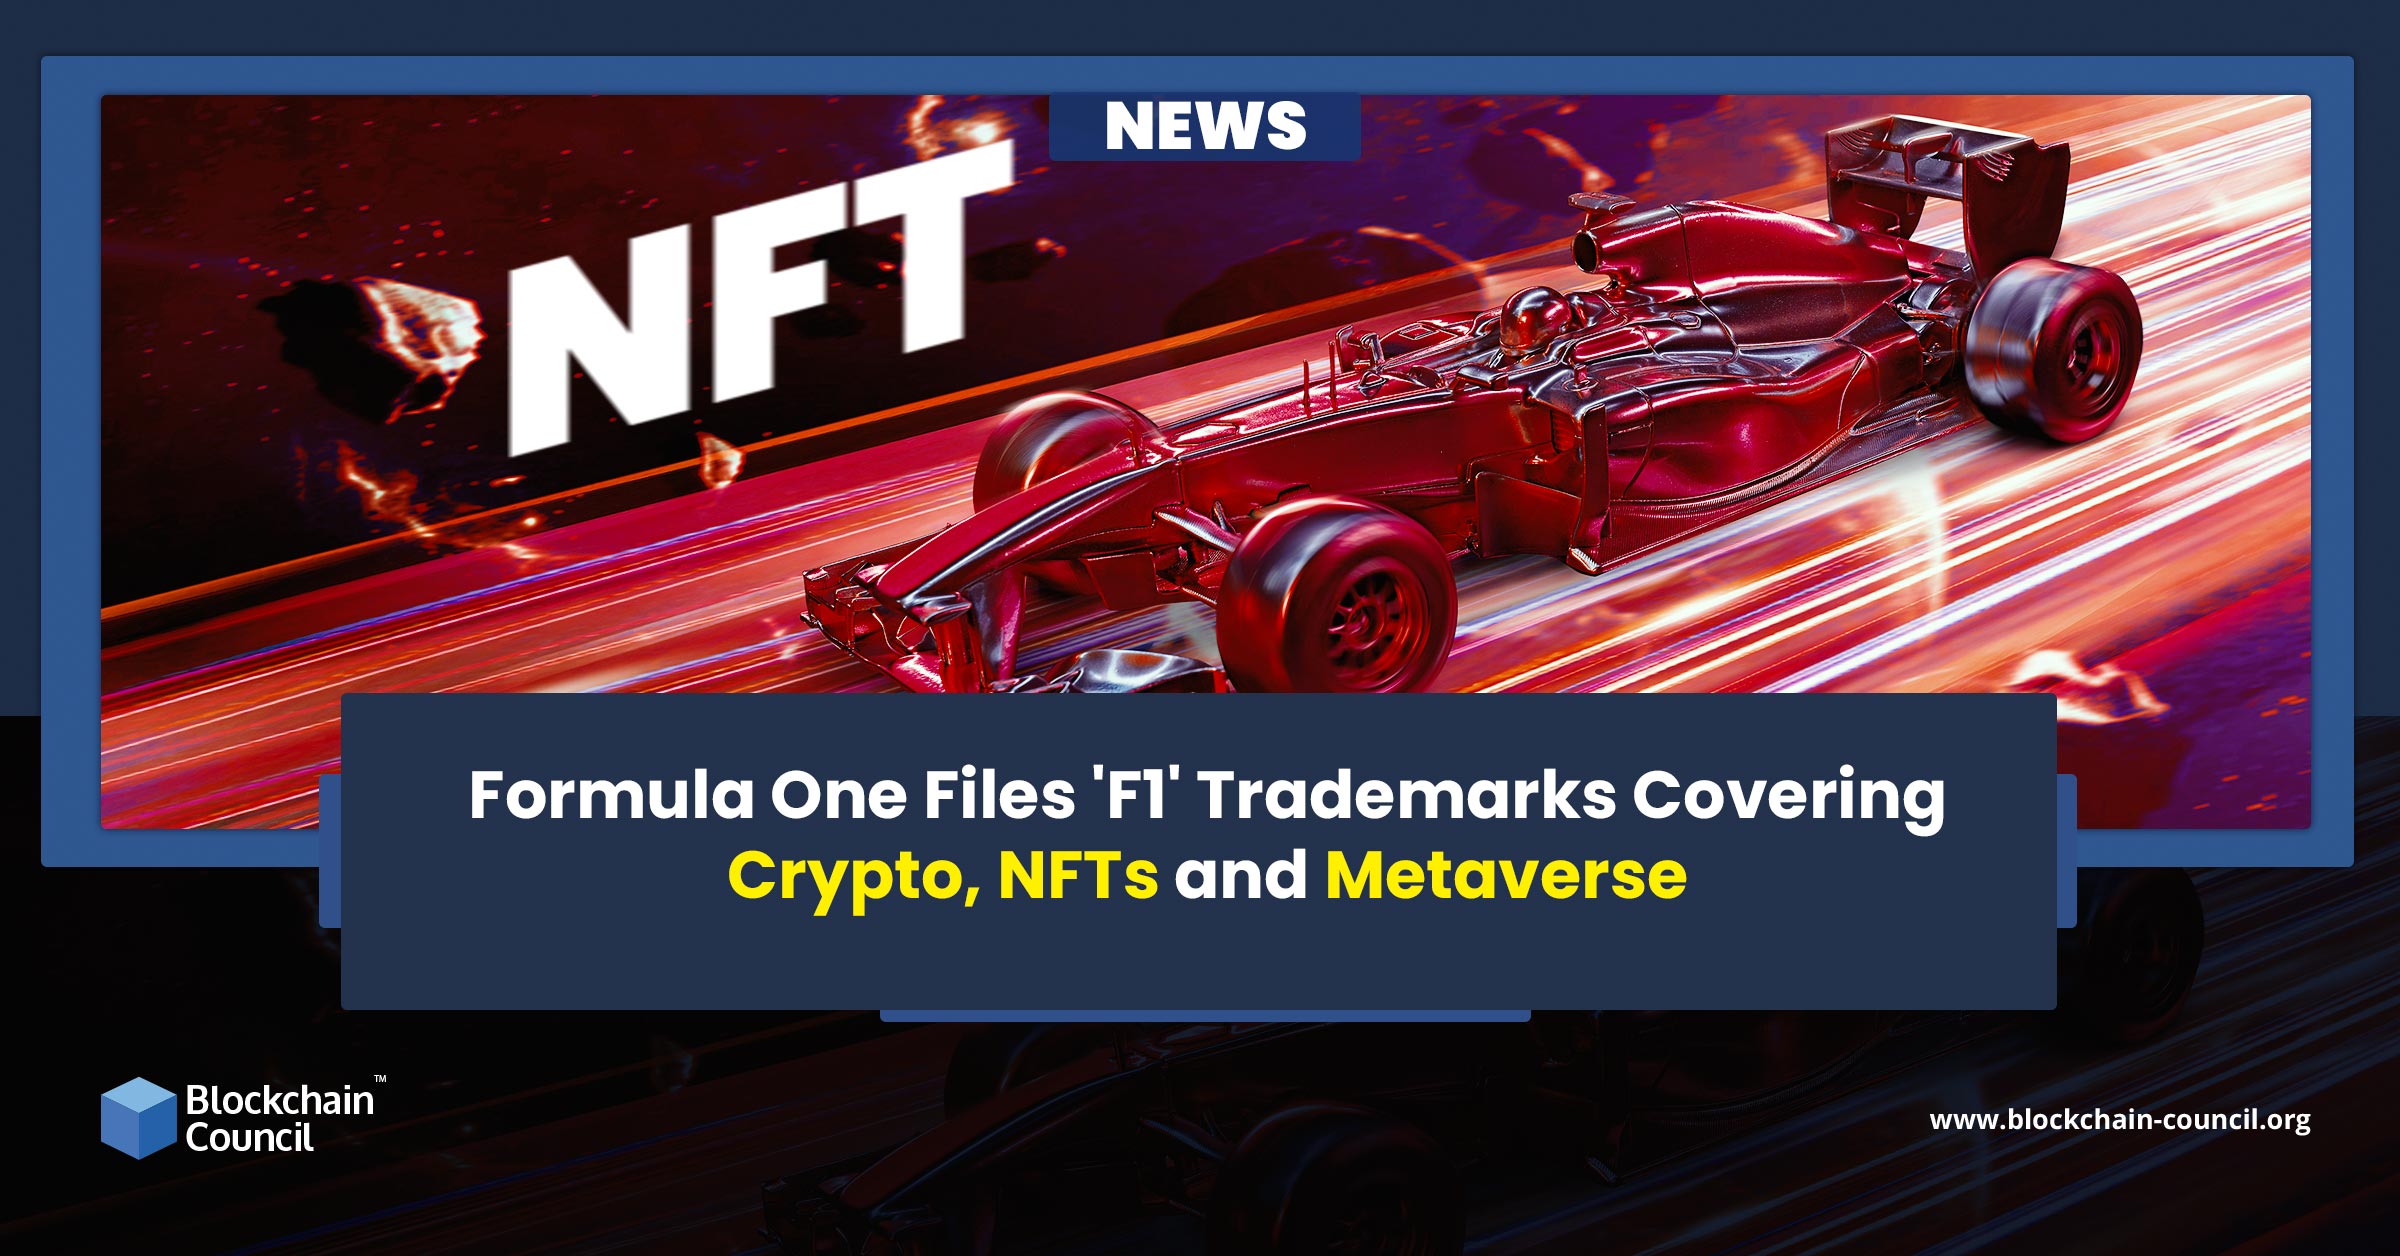 Formula One Files 'F1' Trademarks Covering Crypto, NFTs and Metaverse